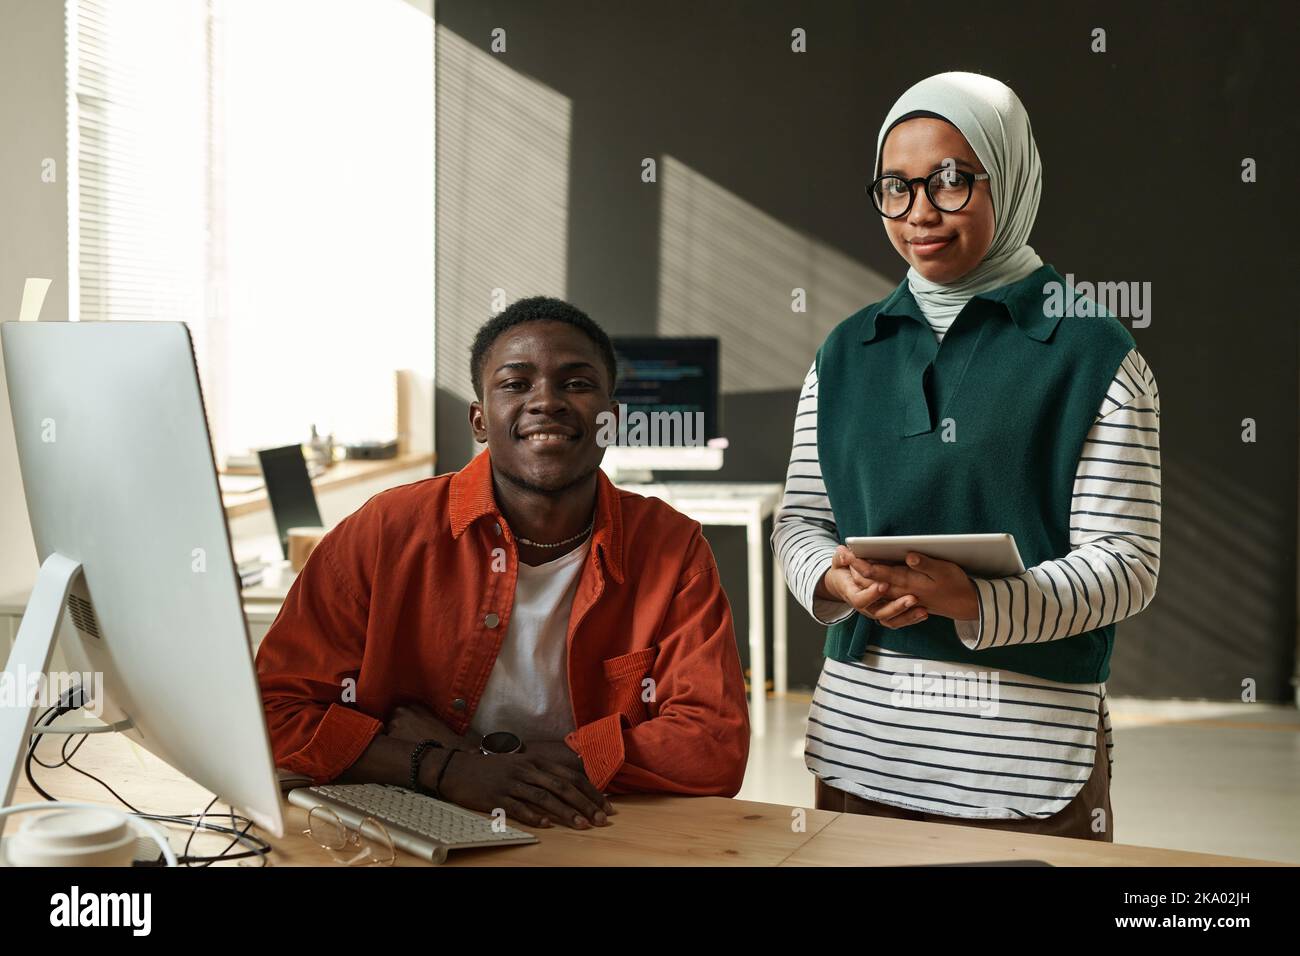 Two young software developers looking at camera while black man sitting by desk and Muslim woman with tablet standing next to him Stock Photo